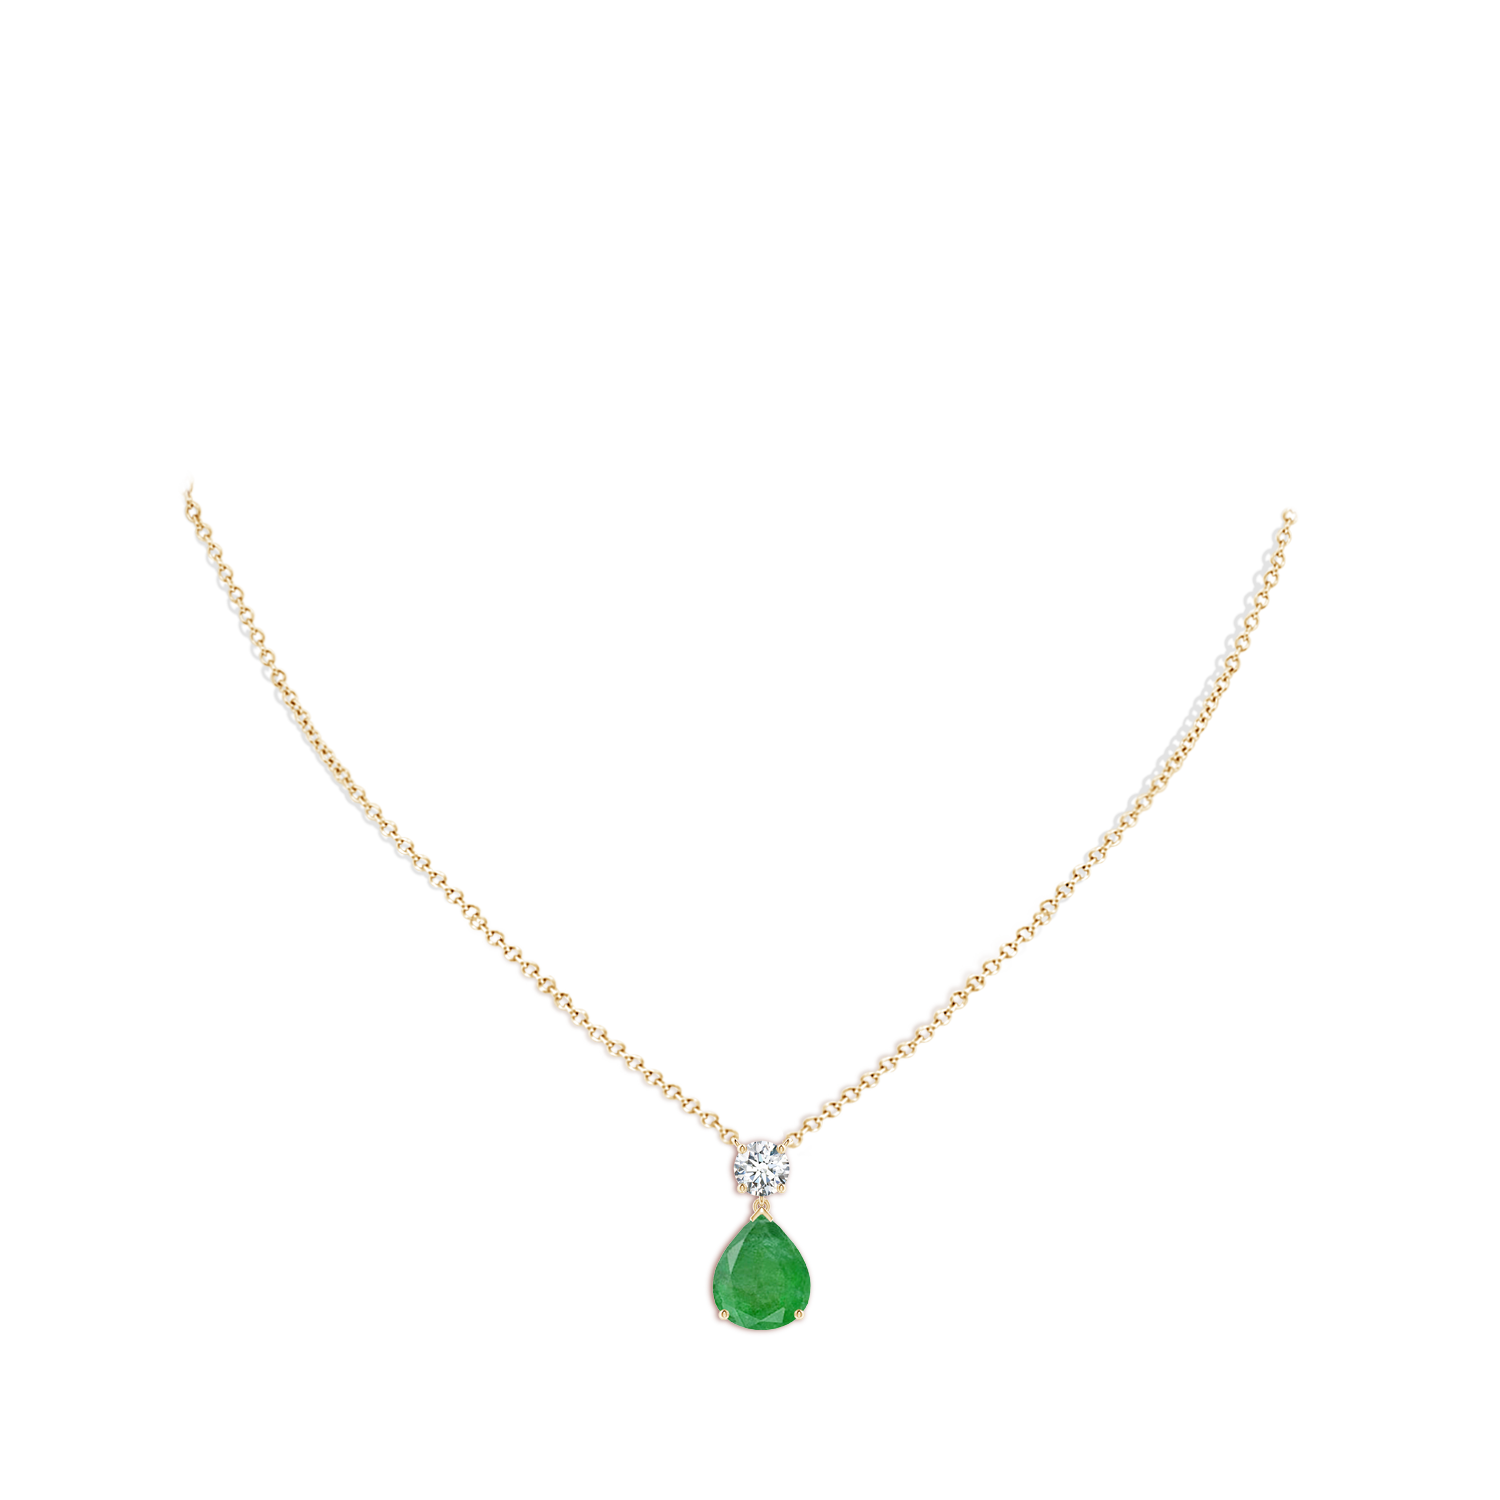 A - Emerald / 5.21 CT / 14 KT Yellow Gold